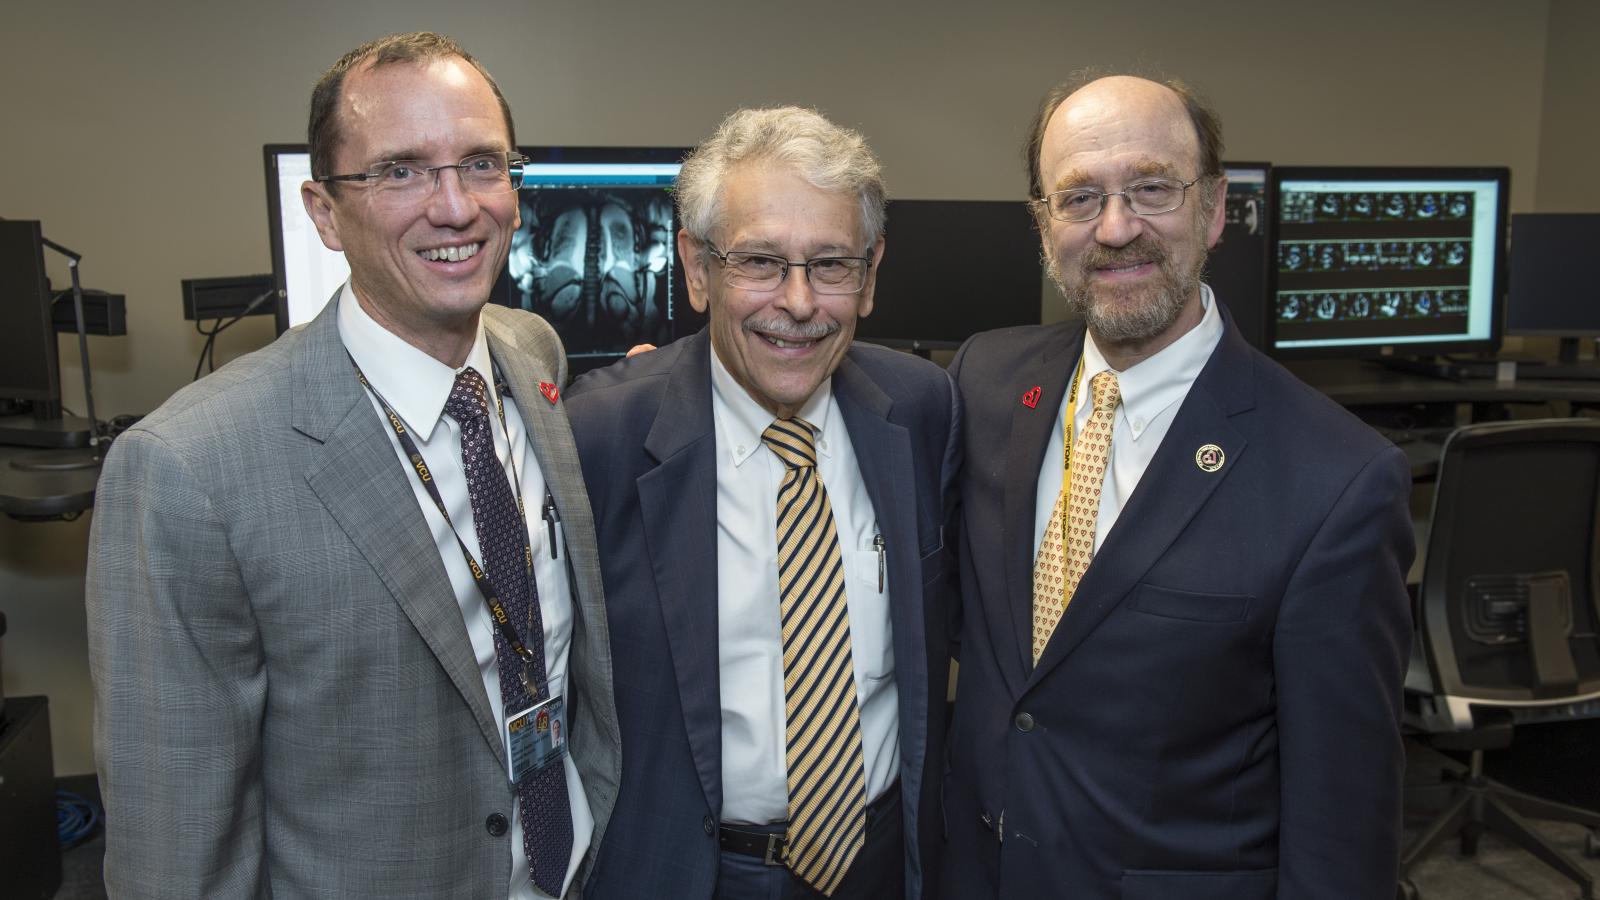 William Hundley, M.D., director of the Pauley Heart Center, spends time with George Vetrovec, M.D., former chair of the Division of Cardiology, and Ken Ellenbogen, M.D., current chair of the Division of Cardiology, after the ribbon cutting at VCU Health’s new Cardiac Imaging Suite. Photo: Kevin Morley, VCU University Marketing